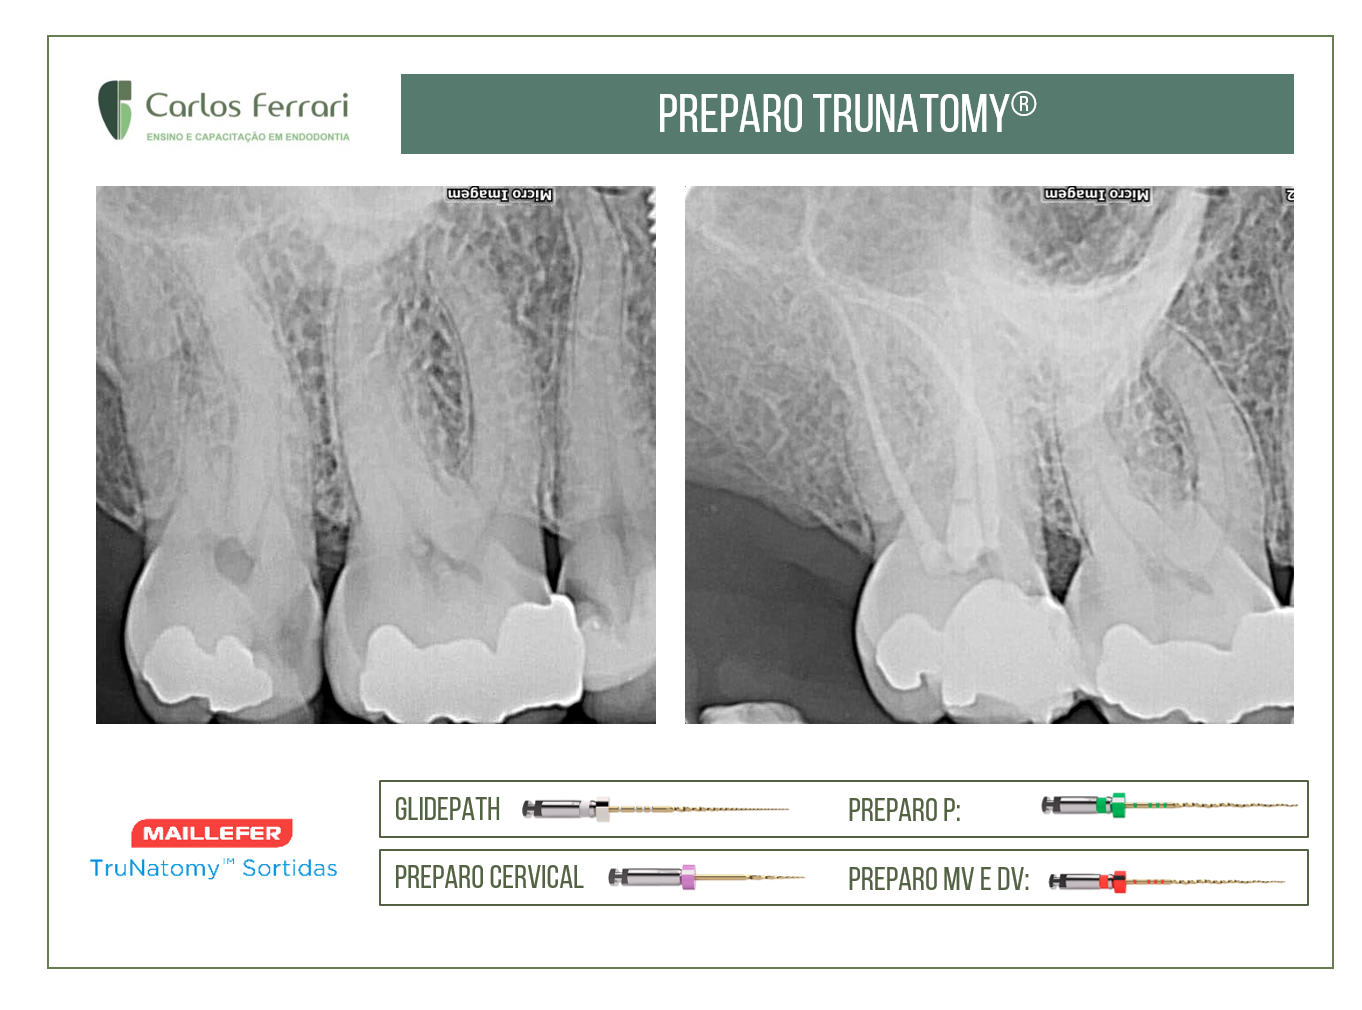 You are currently viewing Endodontic preparation with the Trunatomy system